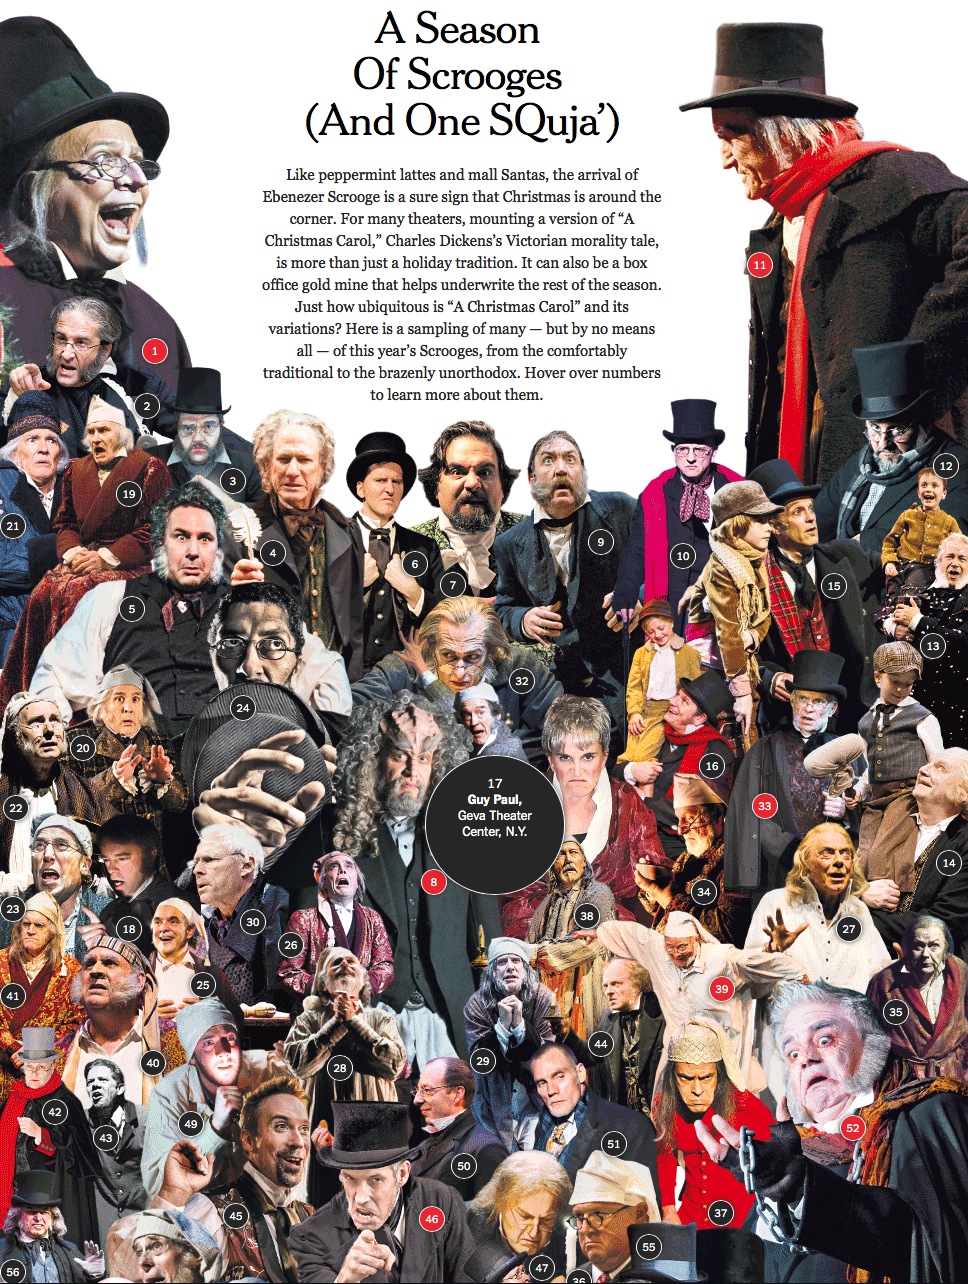 NYTimes-ScroogeCollage12-13